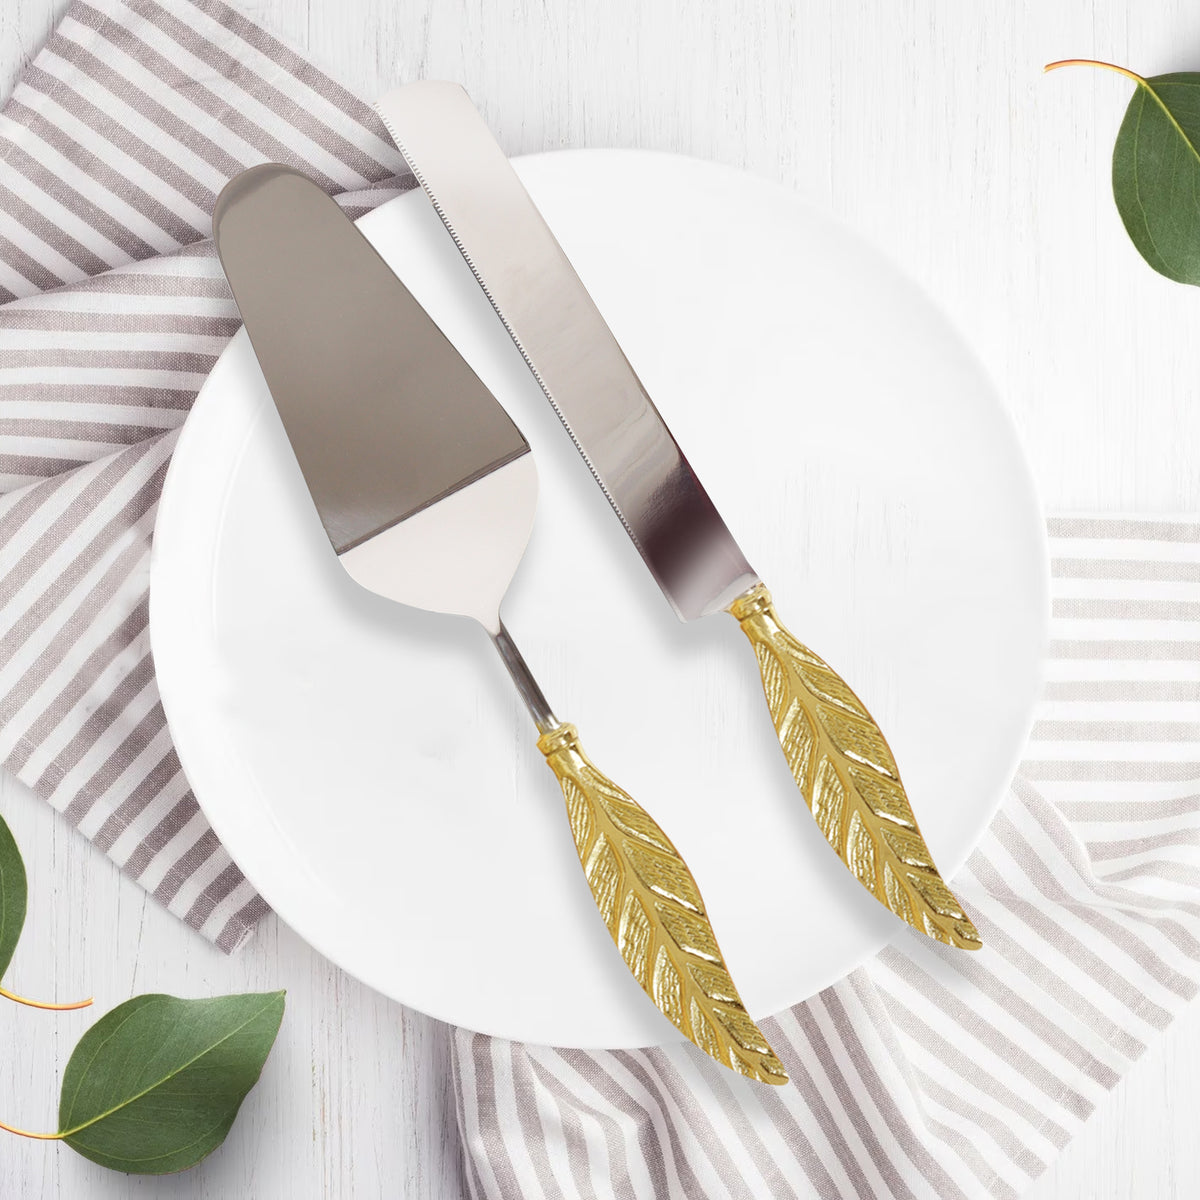 Stainless Steel and Brass Cake Server Set - Leaf